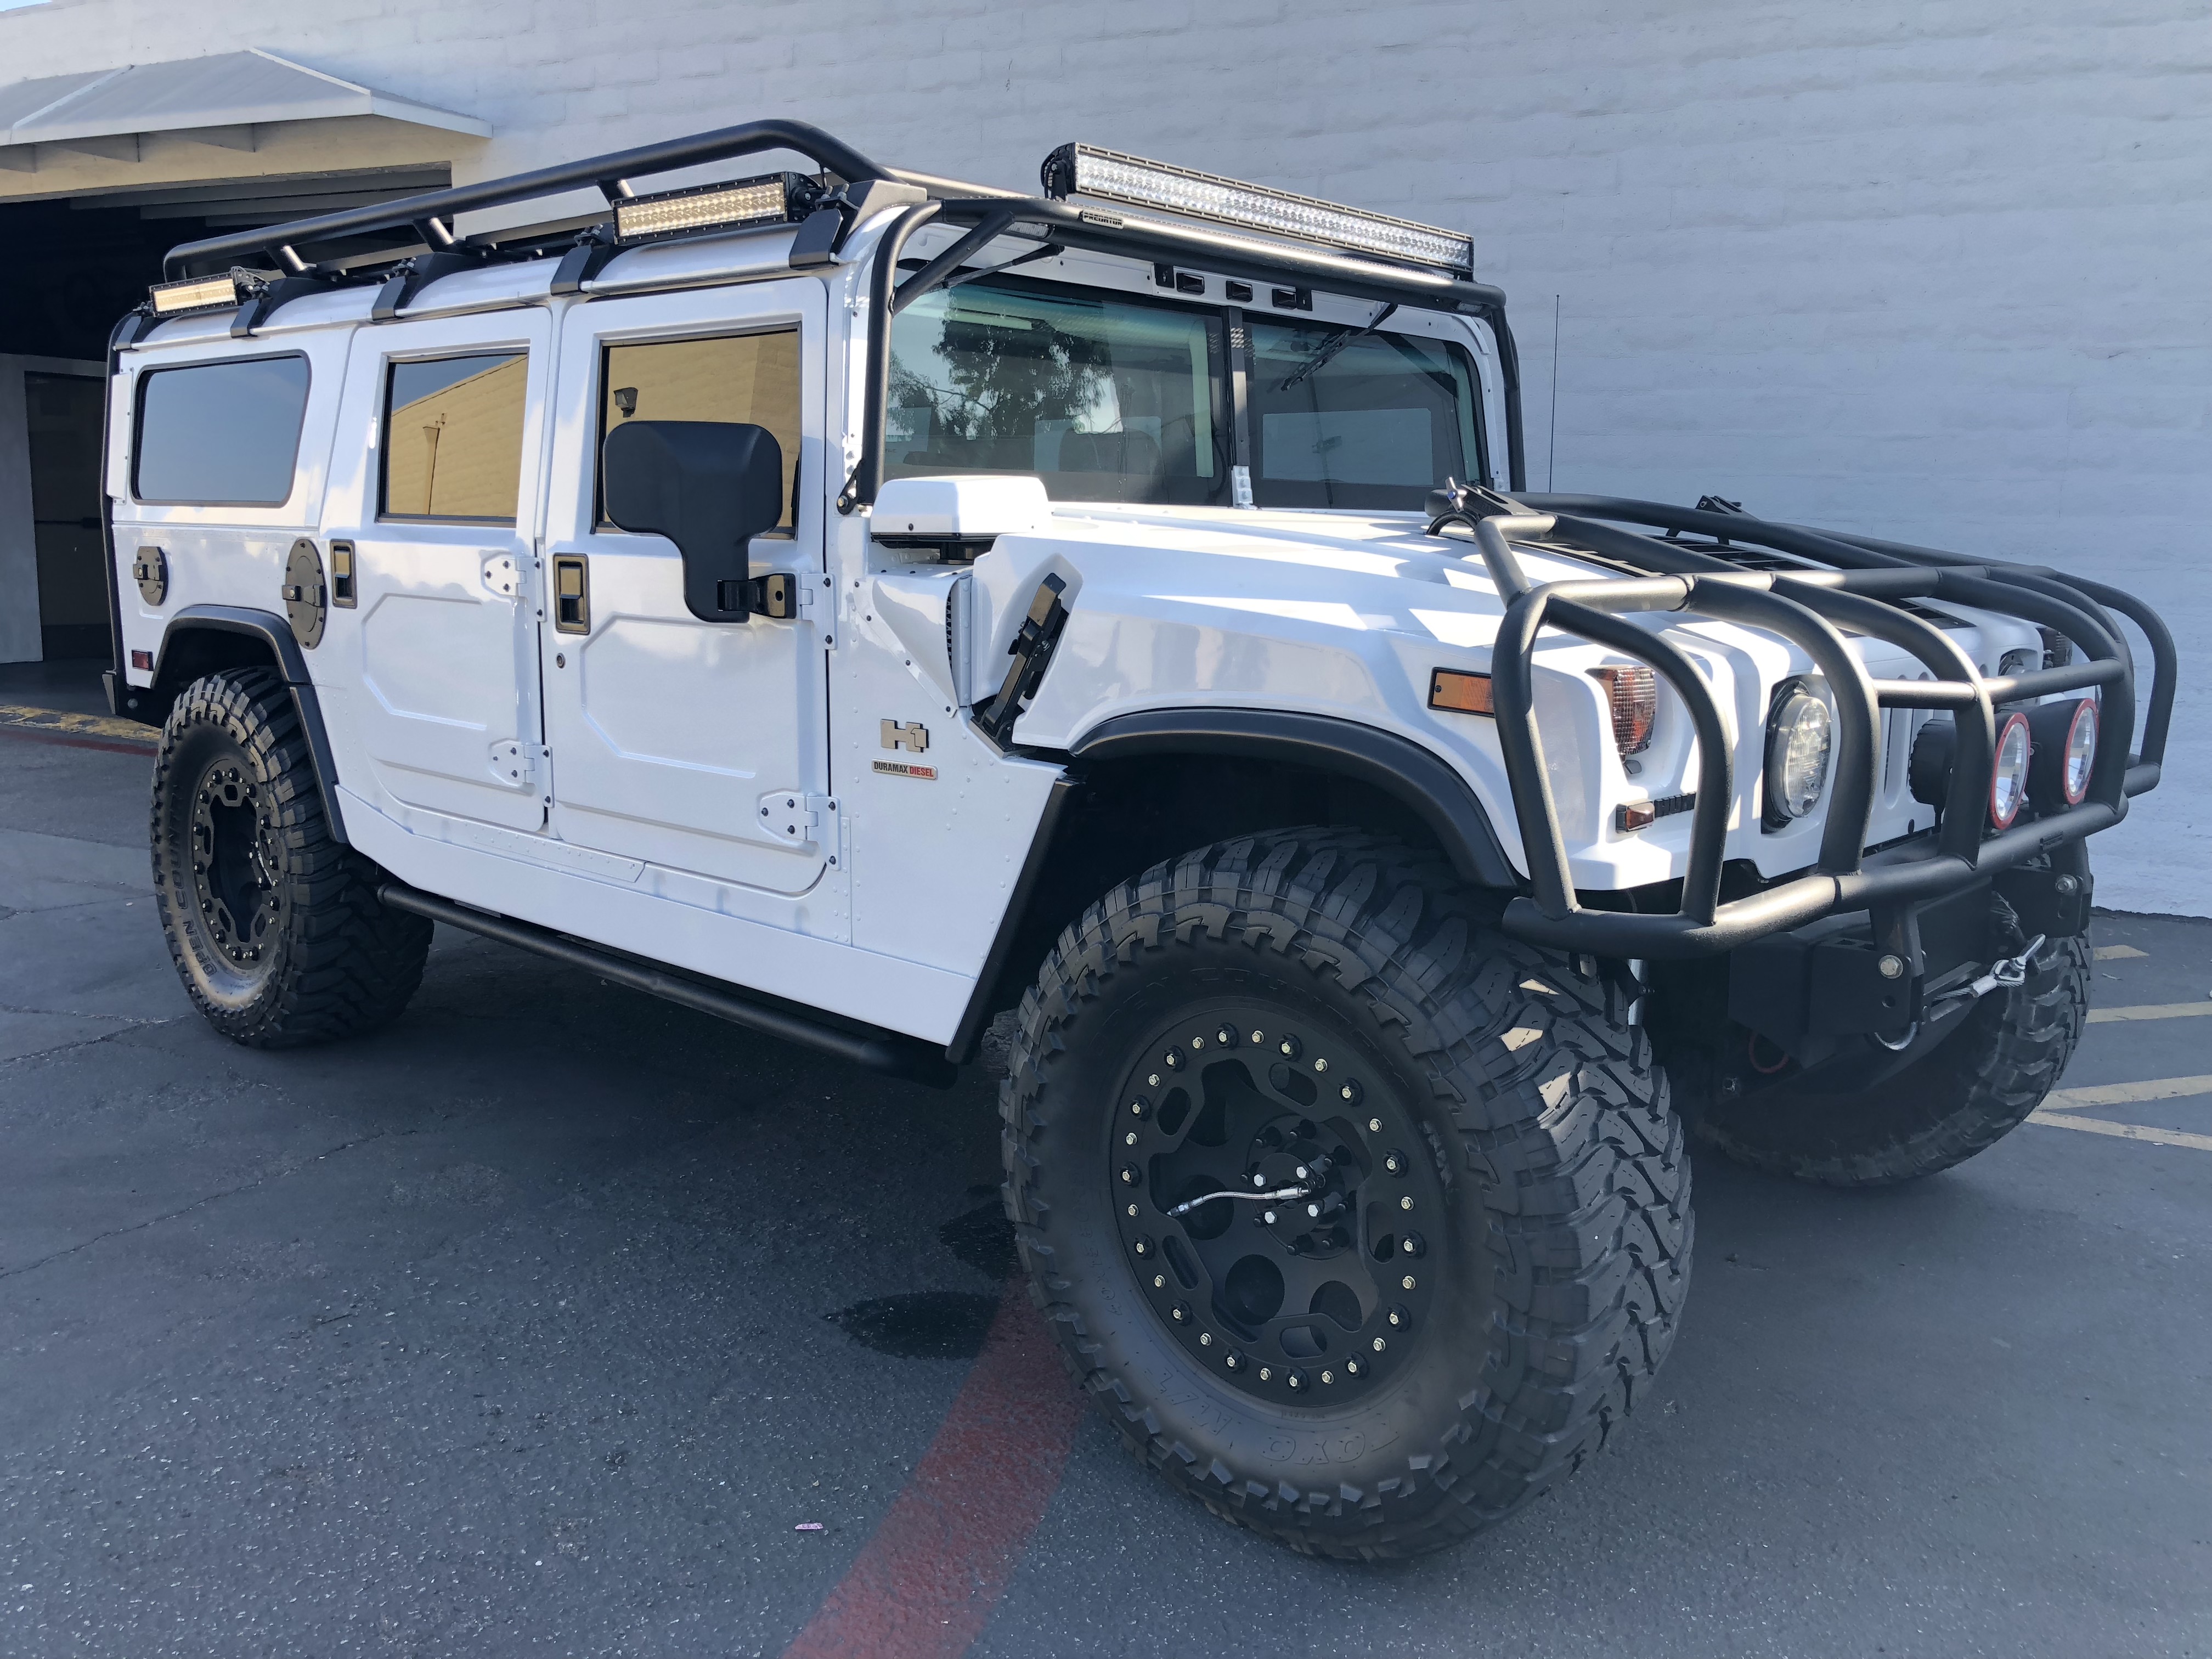 sold…….2006 Hummer H1 Alpha “VIP Edition” Bullet Proof/ Armored/ Security